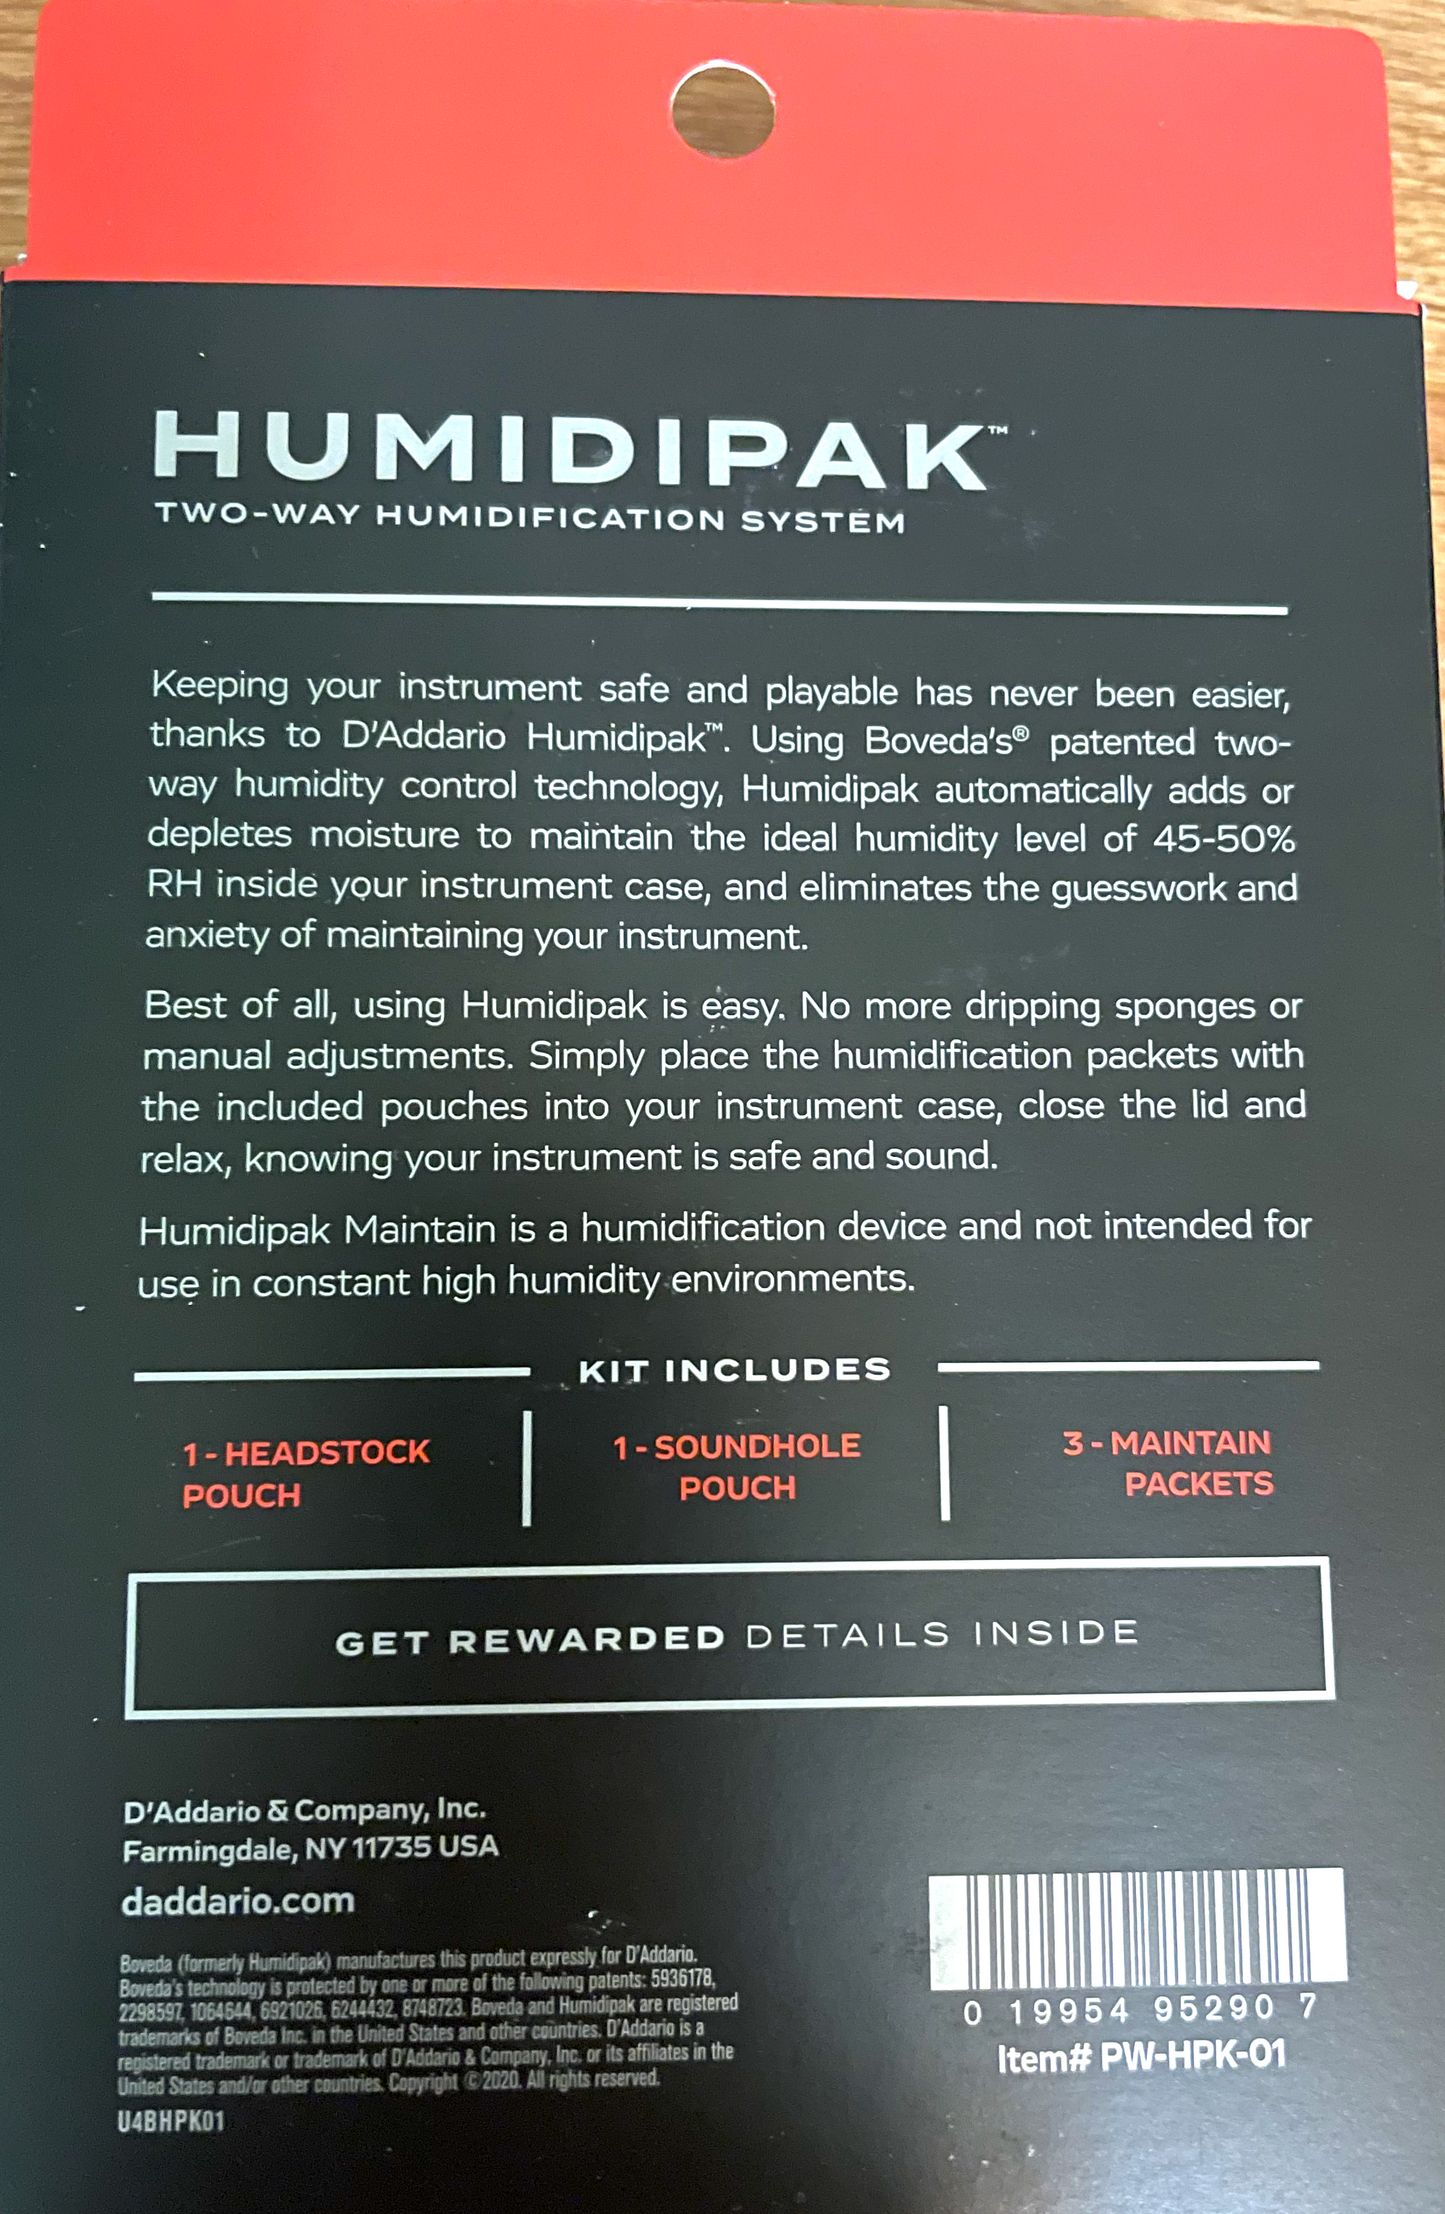 D'Addario Humidipak Automatic Humidity Control System For Acoustic Guitar